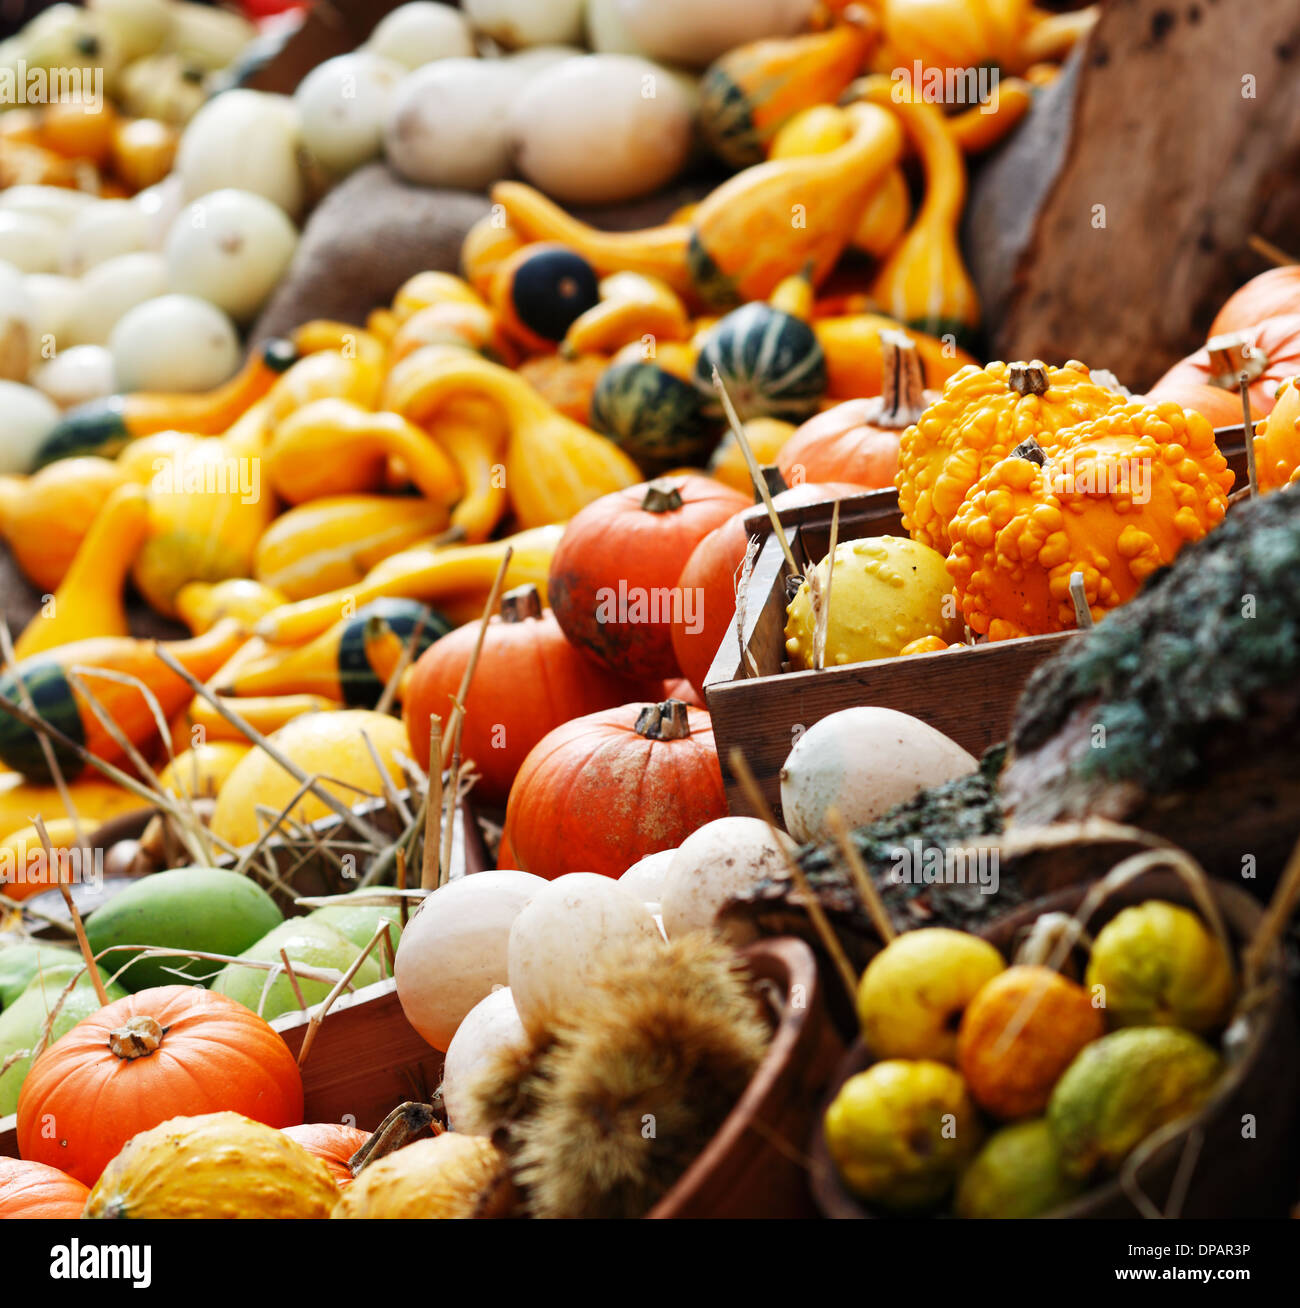 Composition of pumpkins and summer and winter squashes Stock Photo